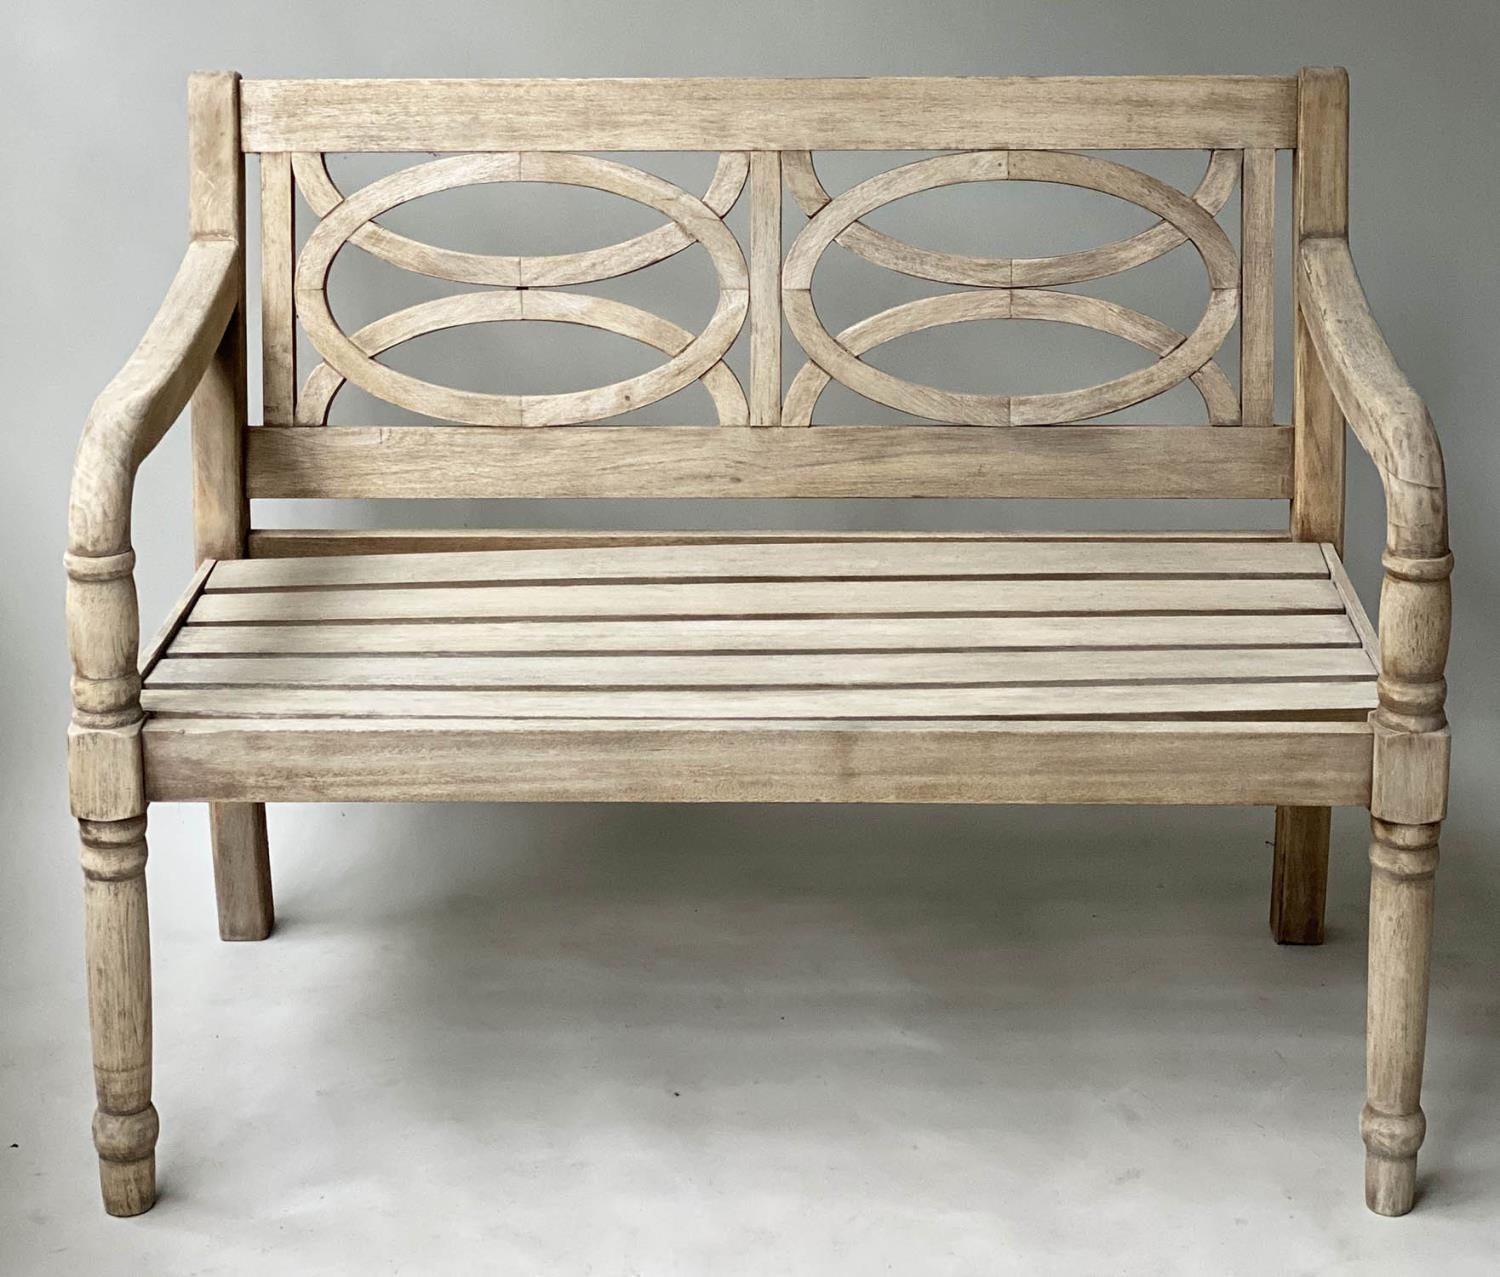 GARDEN BENCH, colonial veranda style weathered teak with circles slatted back and downswept arms,